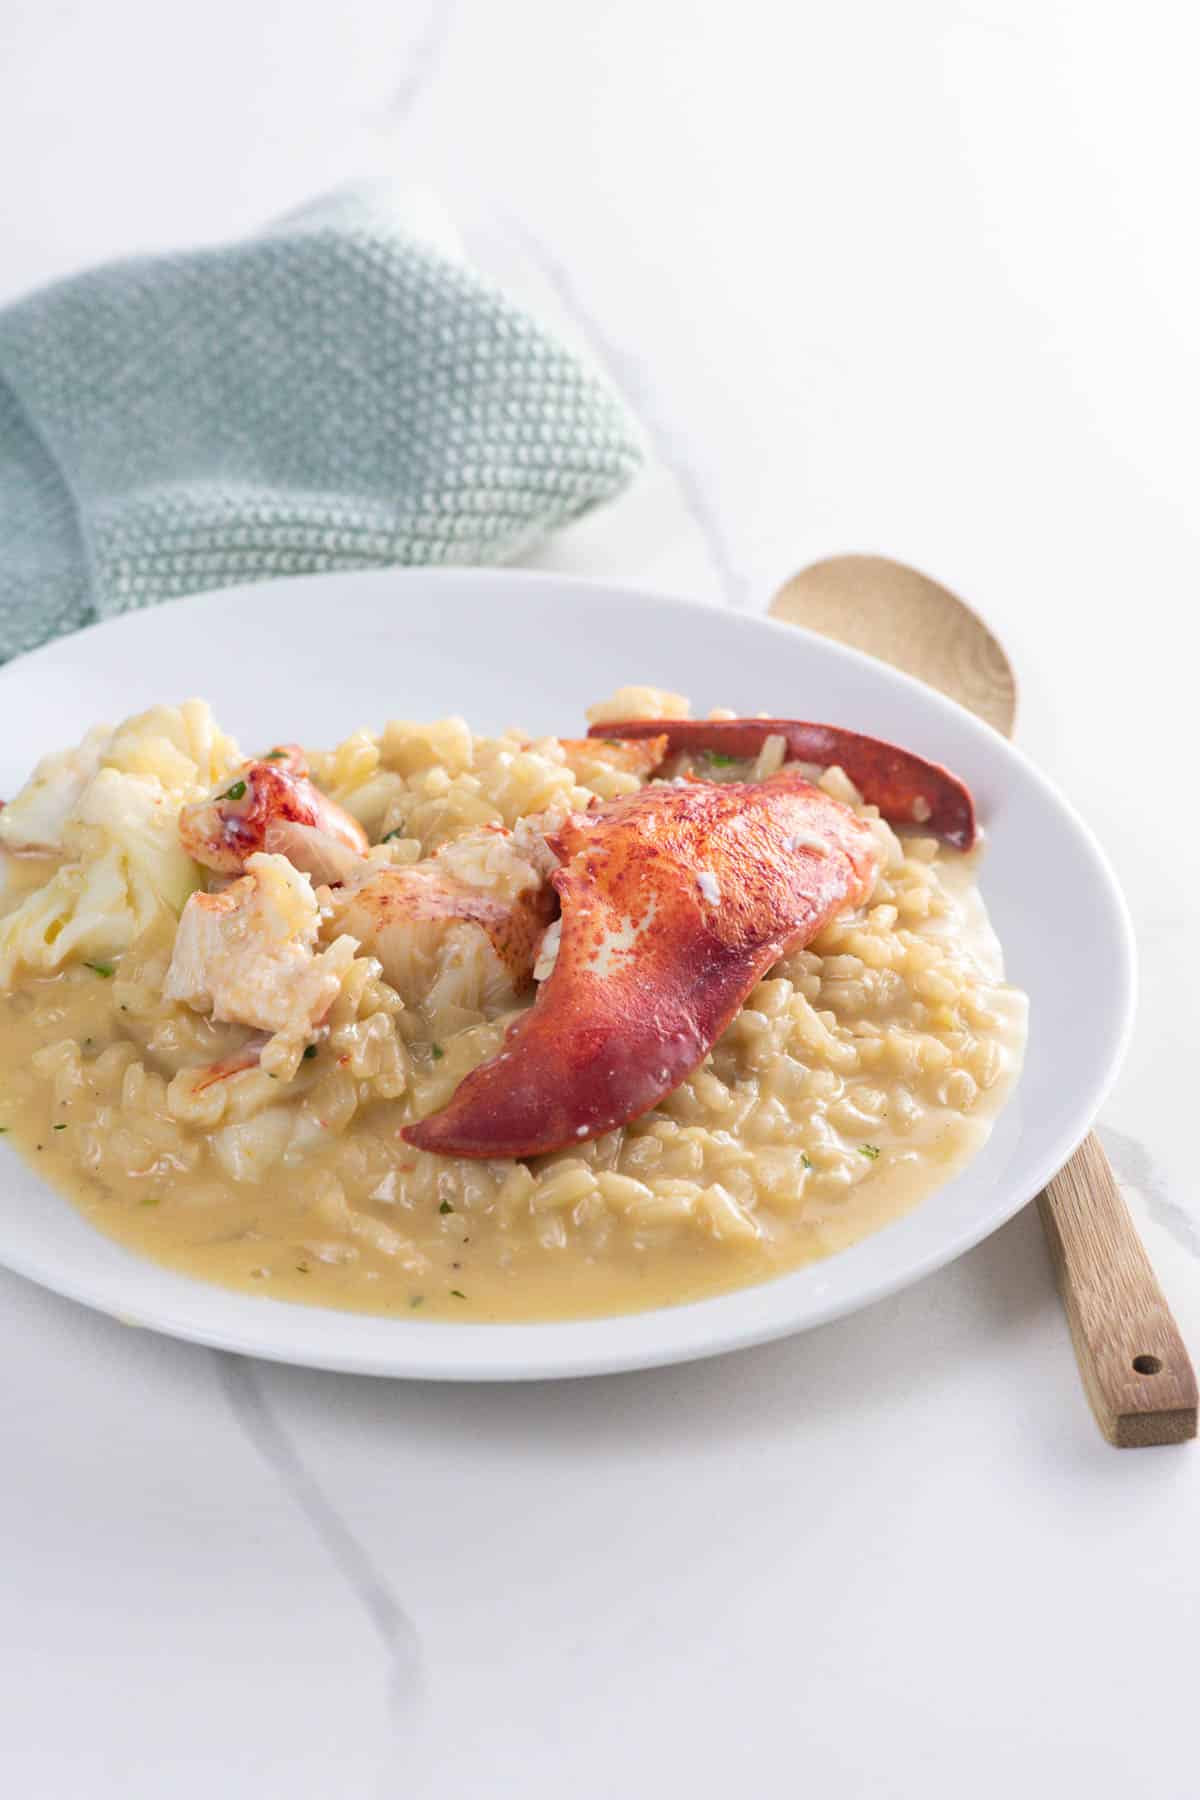 lobster risotto on a plate with a napkin and a small wooden spoon